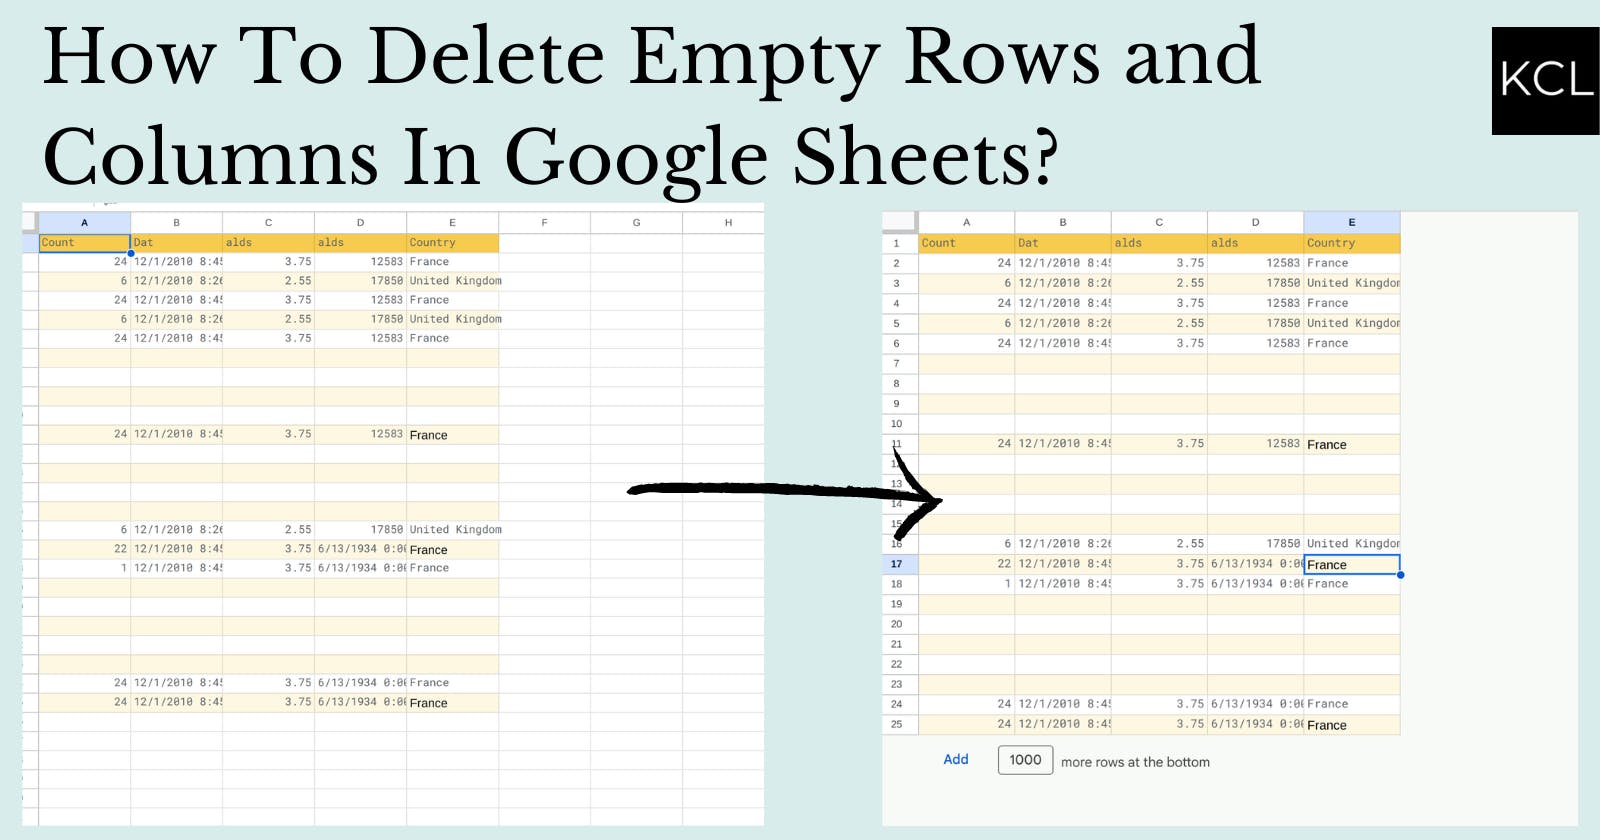 How To Delete Empty Rows and Columns In Google Sheets?